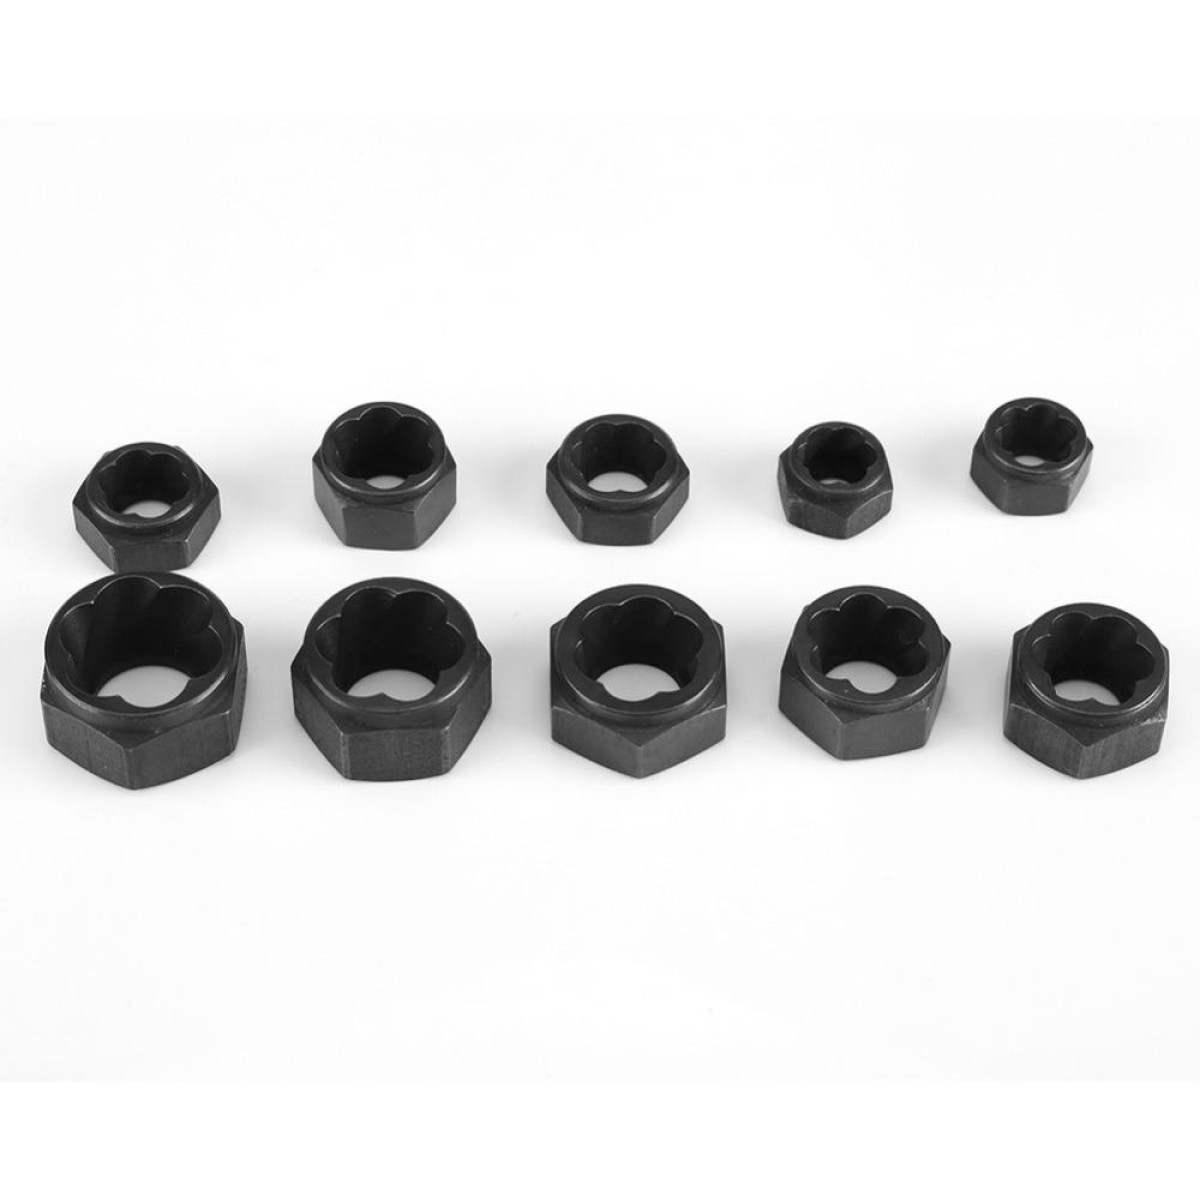 10 In 1 Damaged Nut Bolt Extractor Sleeve Hex Nut Removal Tool, Style:Low Style